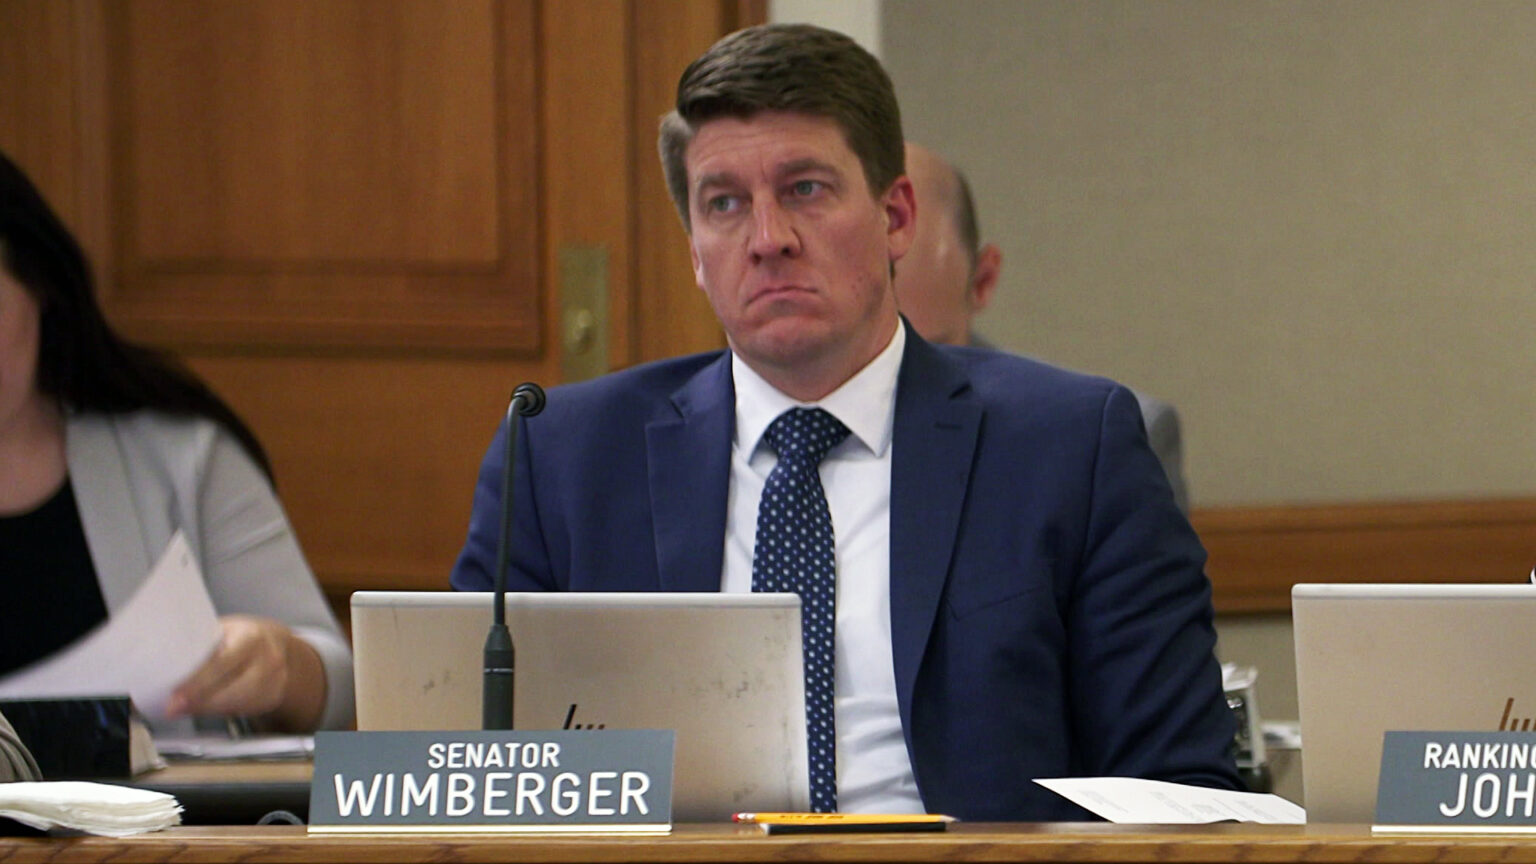 Eric Wimberger sits at a table behind an open laptop computer and microphone, with a nameplate in front of him reading Senator Wimberger, with other people seated in the background  in front of a closed door.